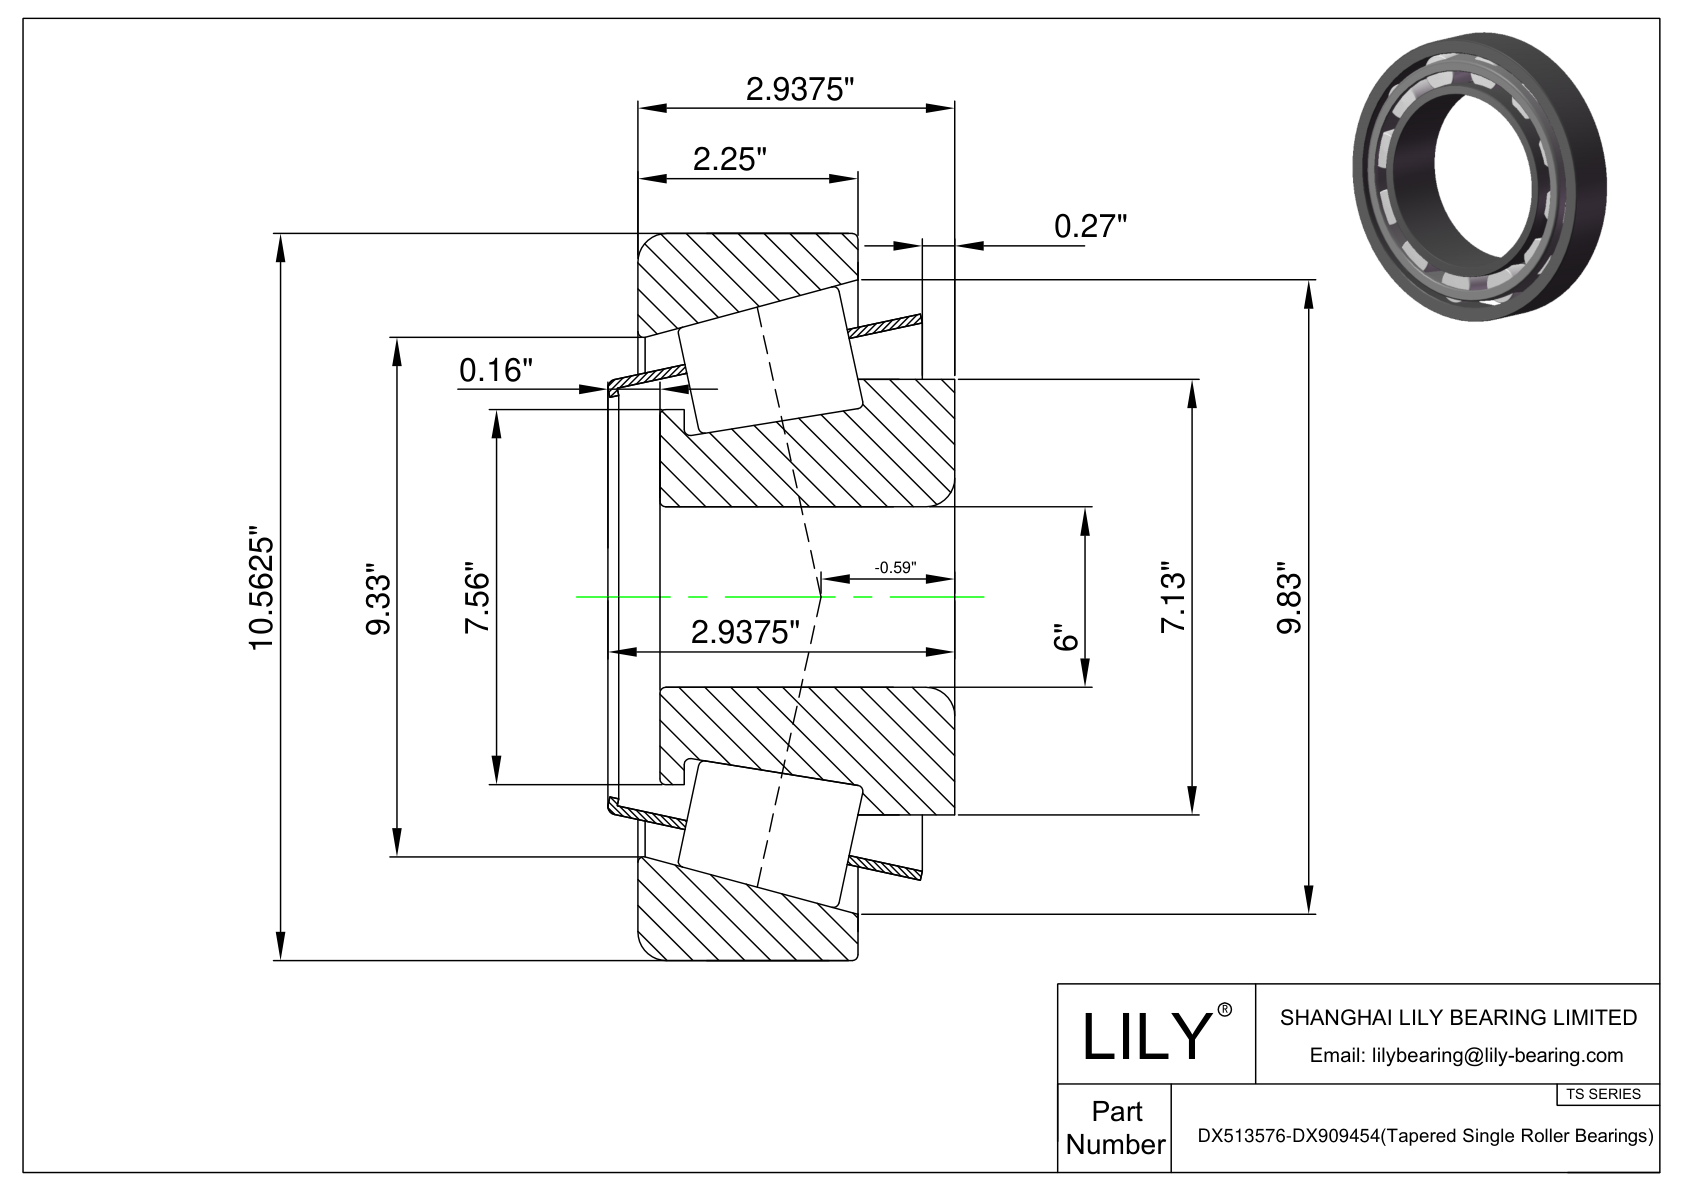 DX513576-DX909454 TS (Tapered Single Roller Bearings) (Imperial) cad drawing